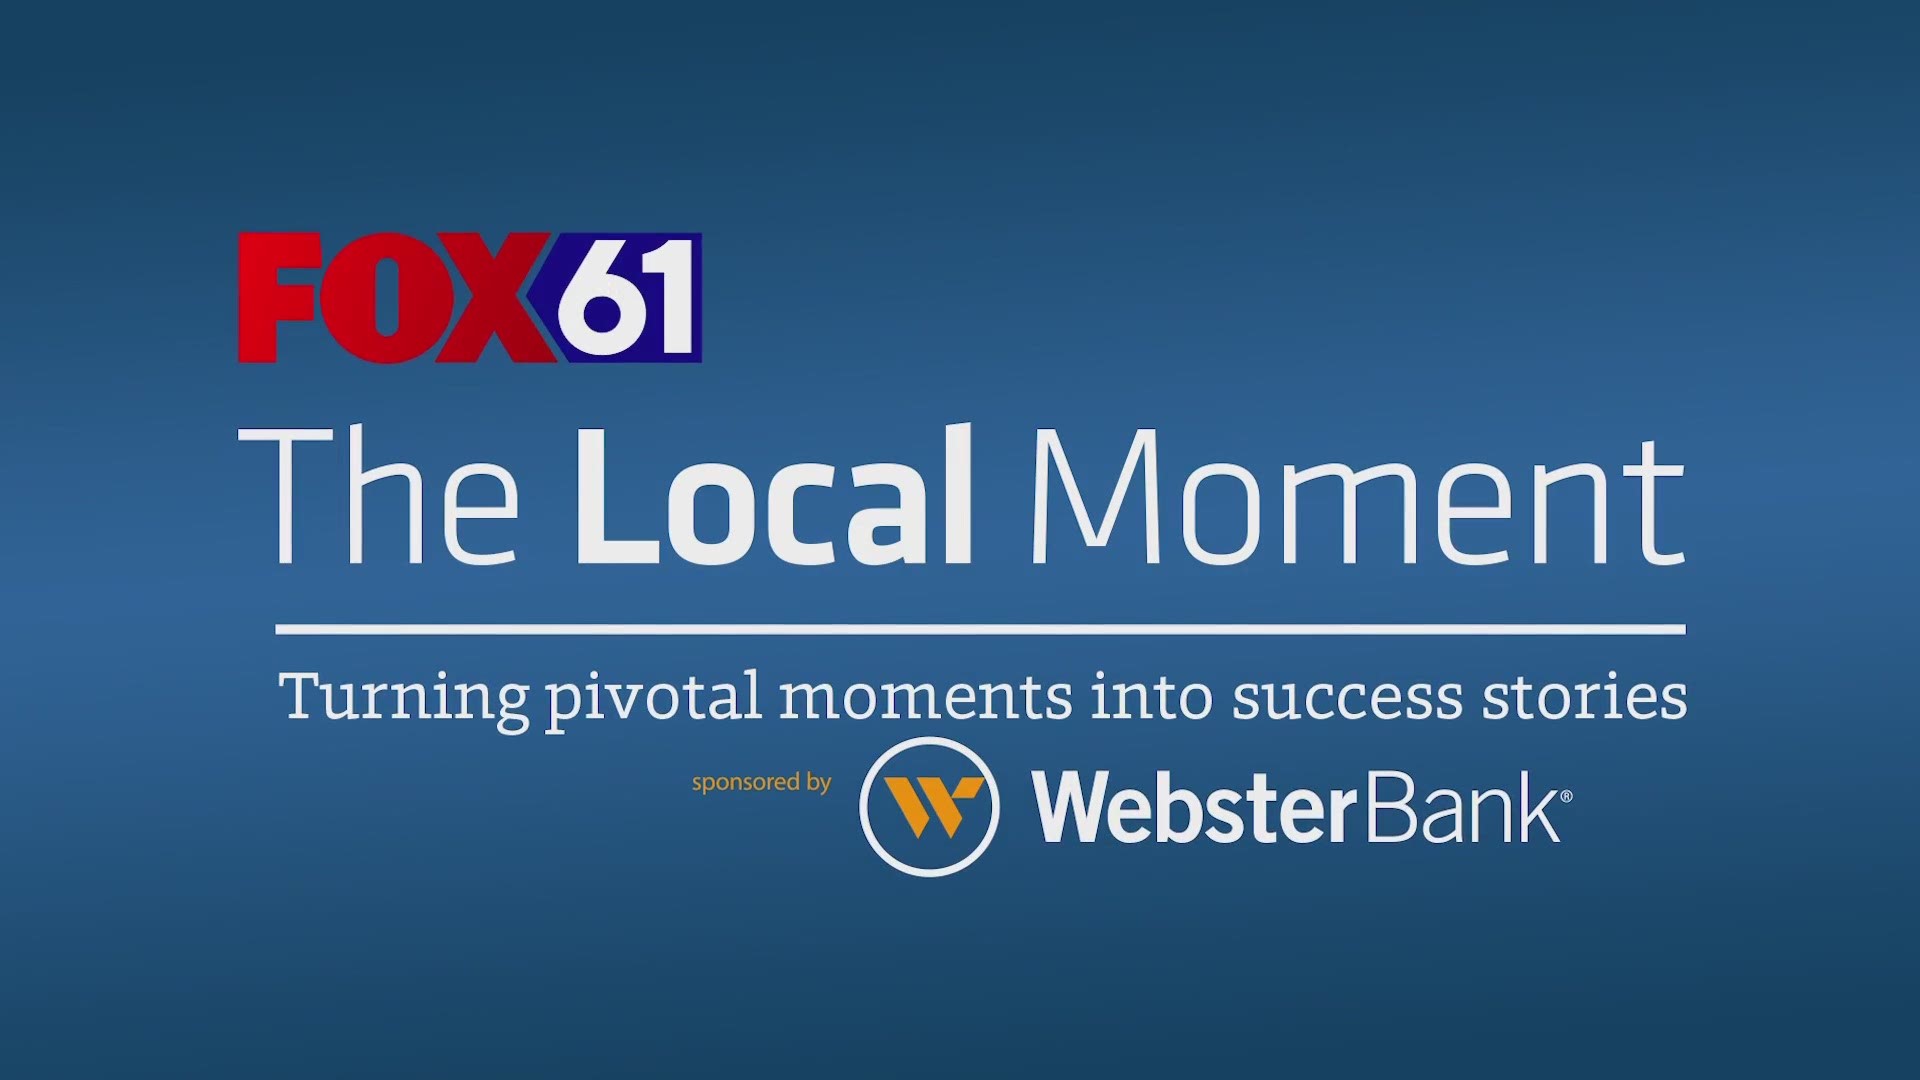 Webster Banks explores The Local Moment with Carla Tillery from Fitzgerald and Halliday.